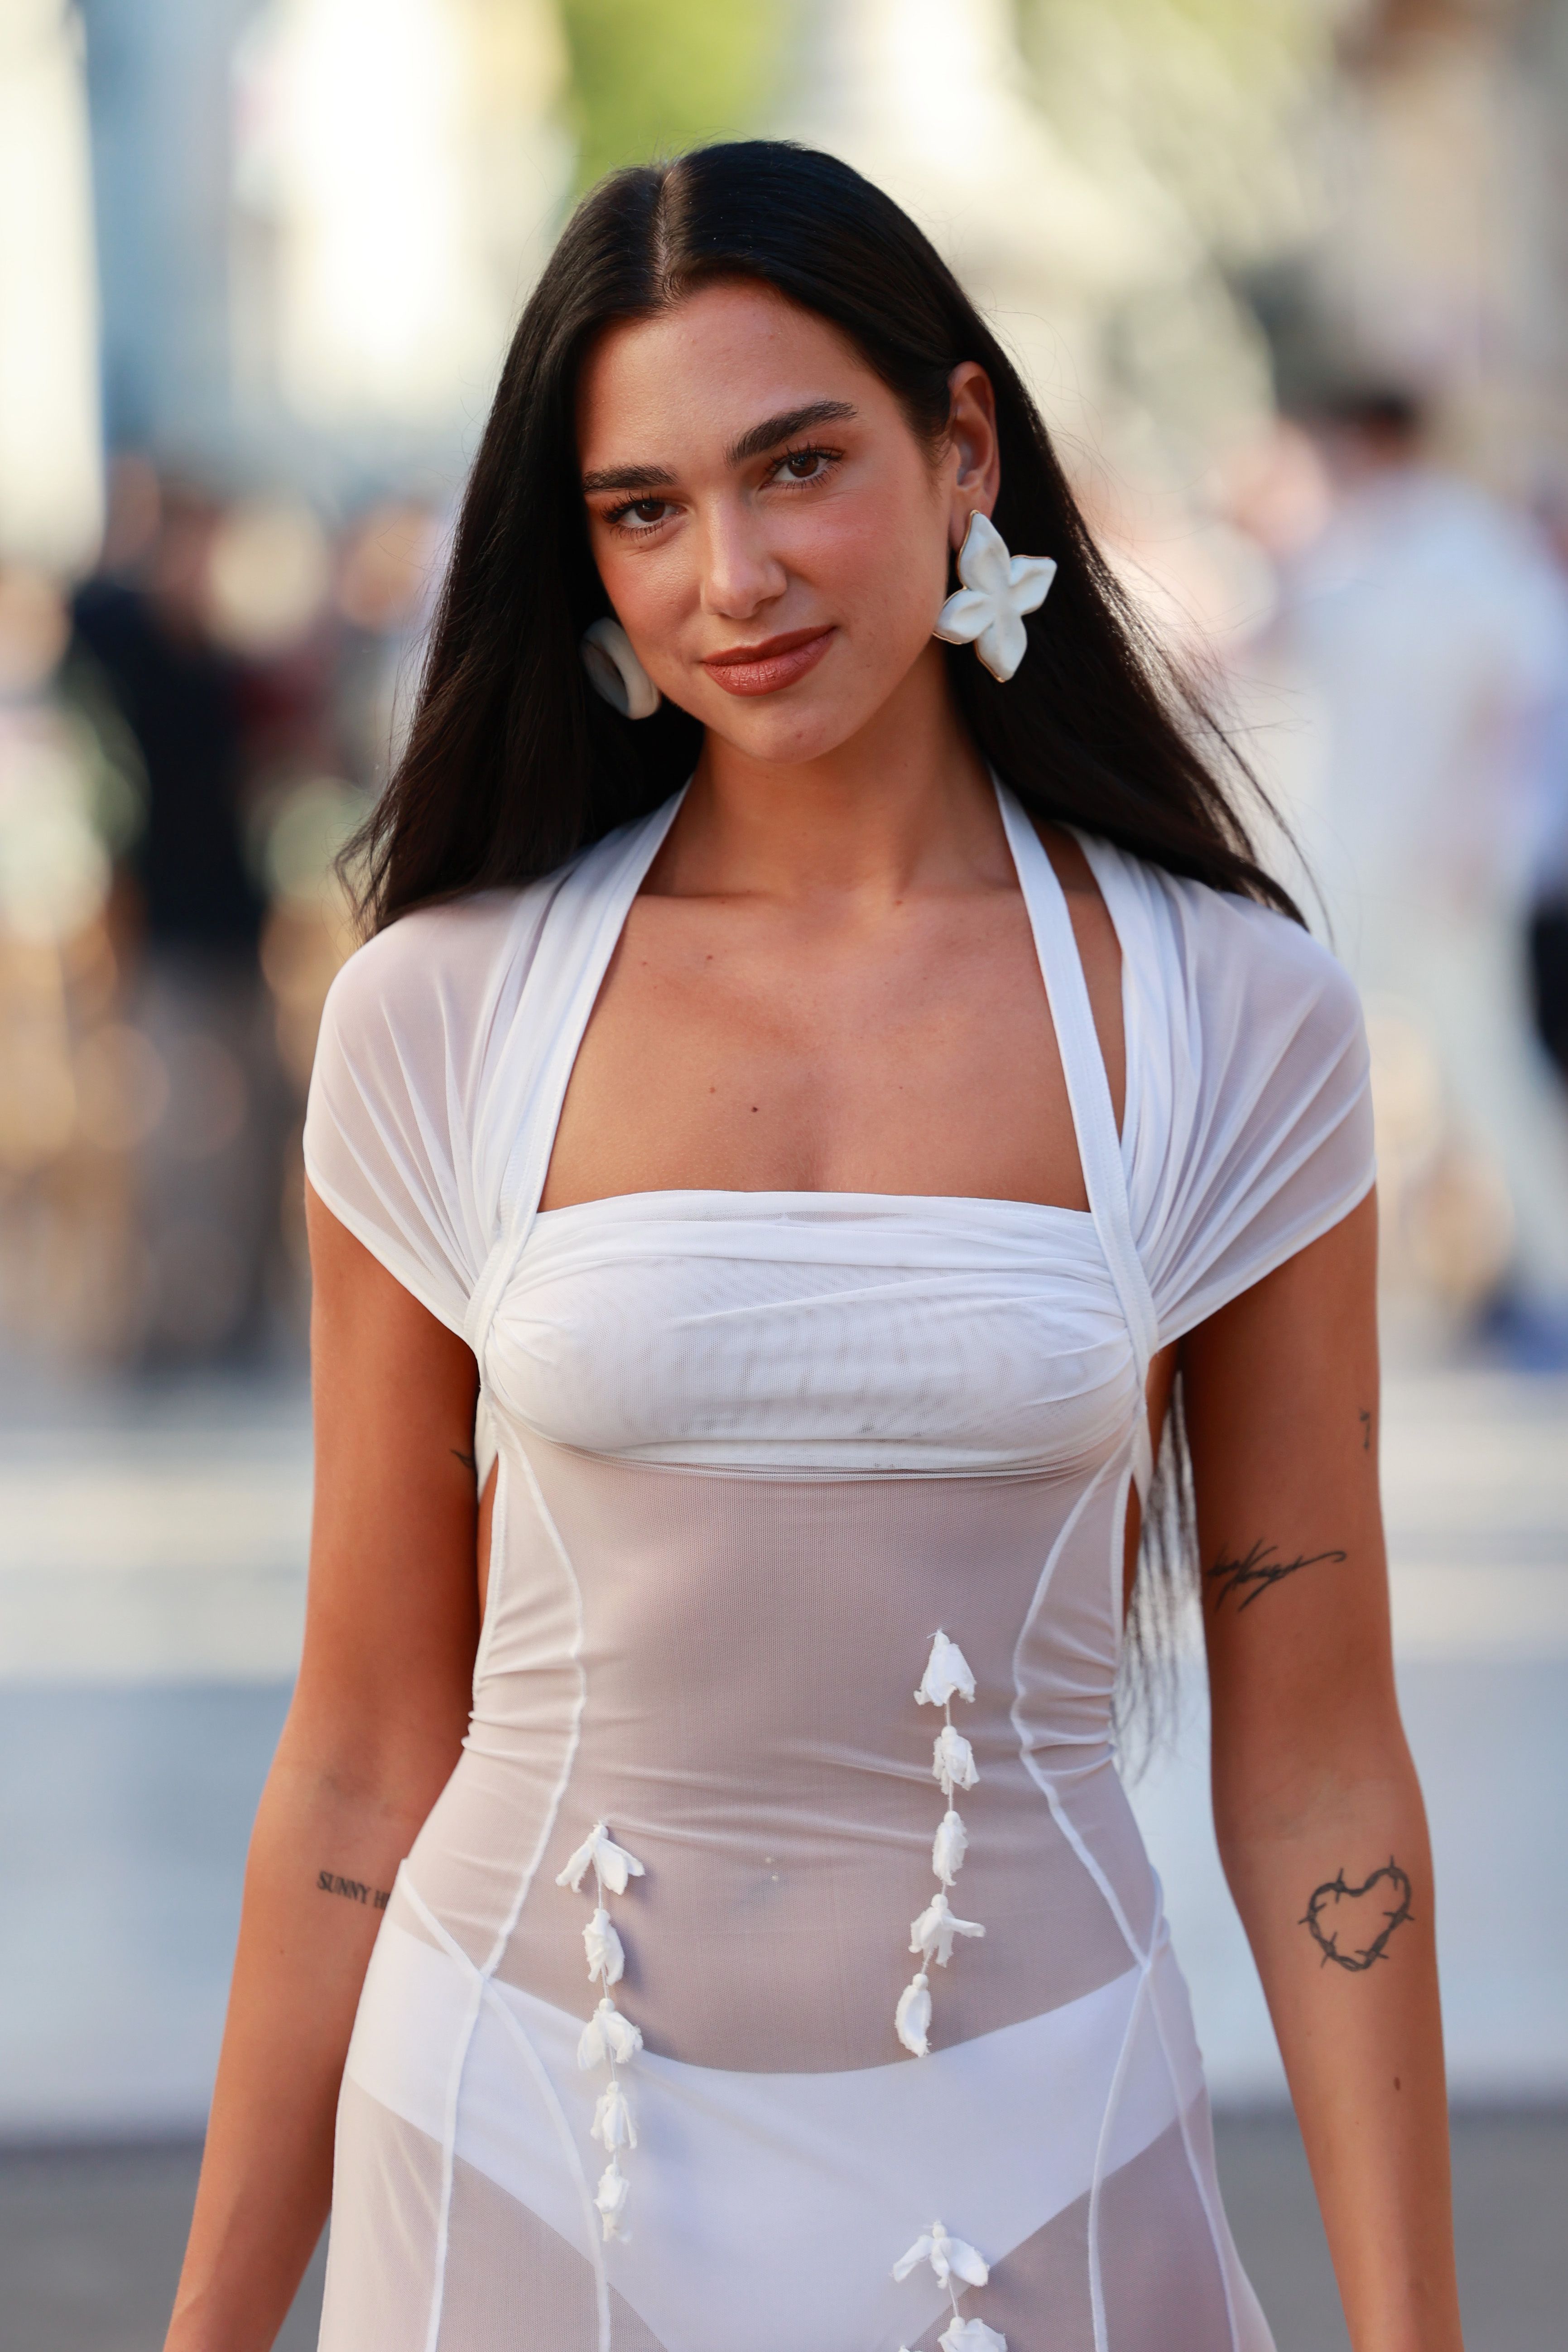 Dua Lipa's lingerie-baring naked dress is sexy af